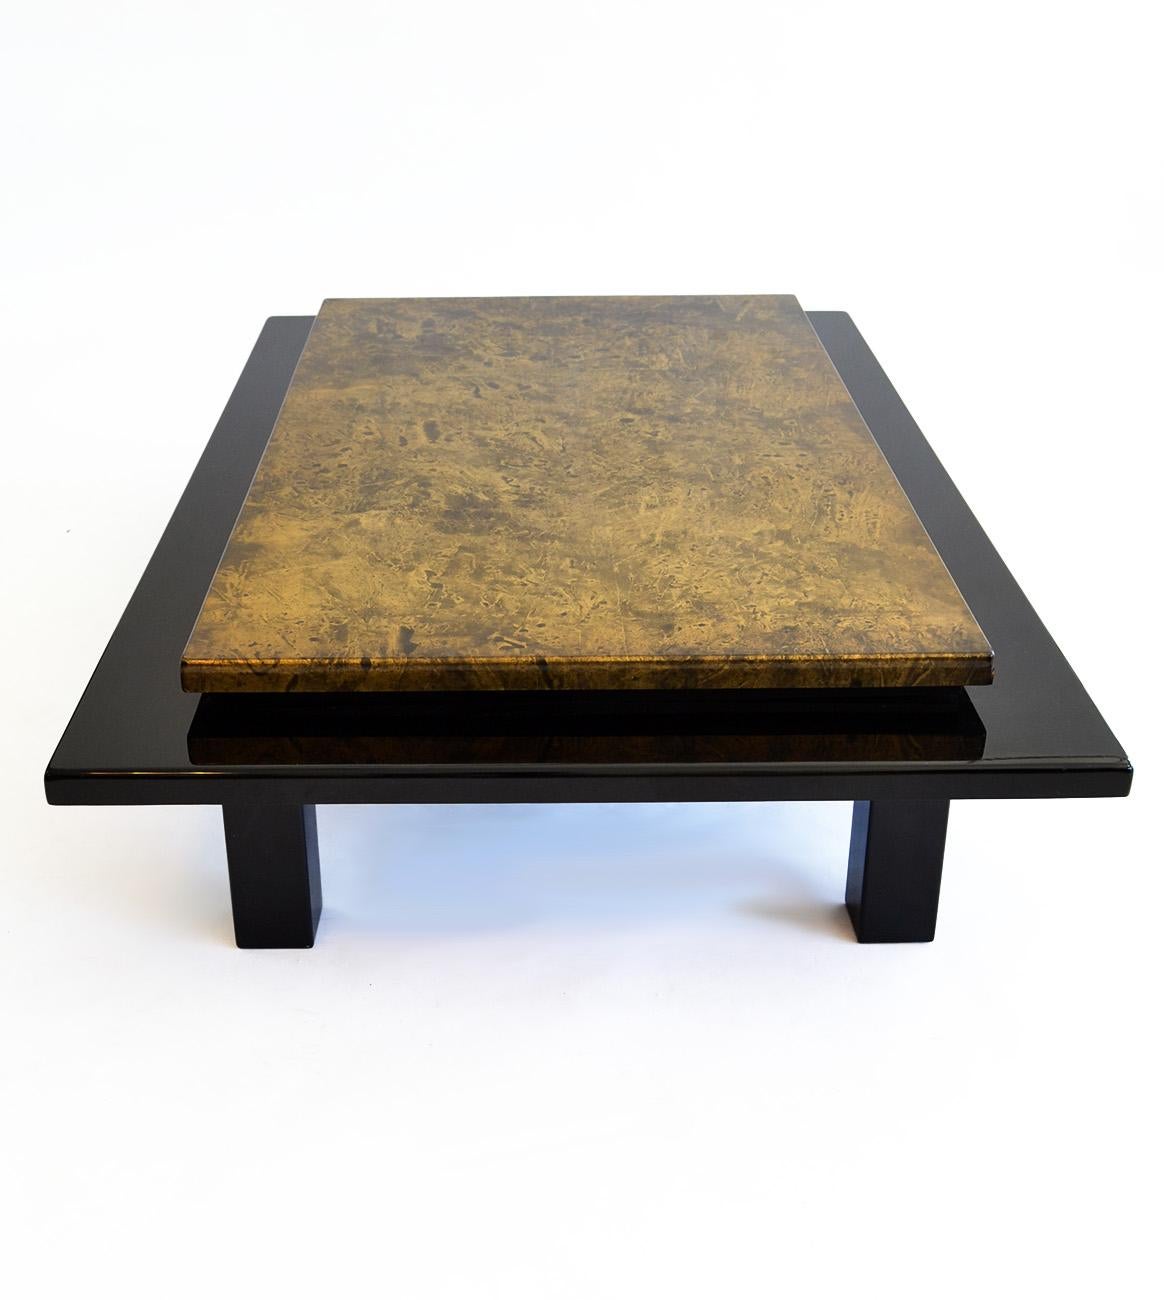 20th Century Decorator Black Lacquered Coffee Table Faux Gold Finish Asian James Mont 1980s For Sale